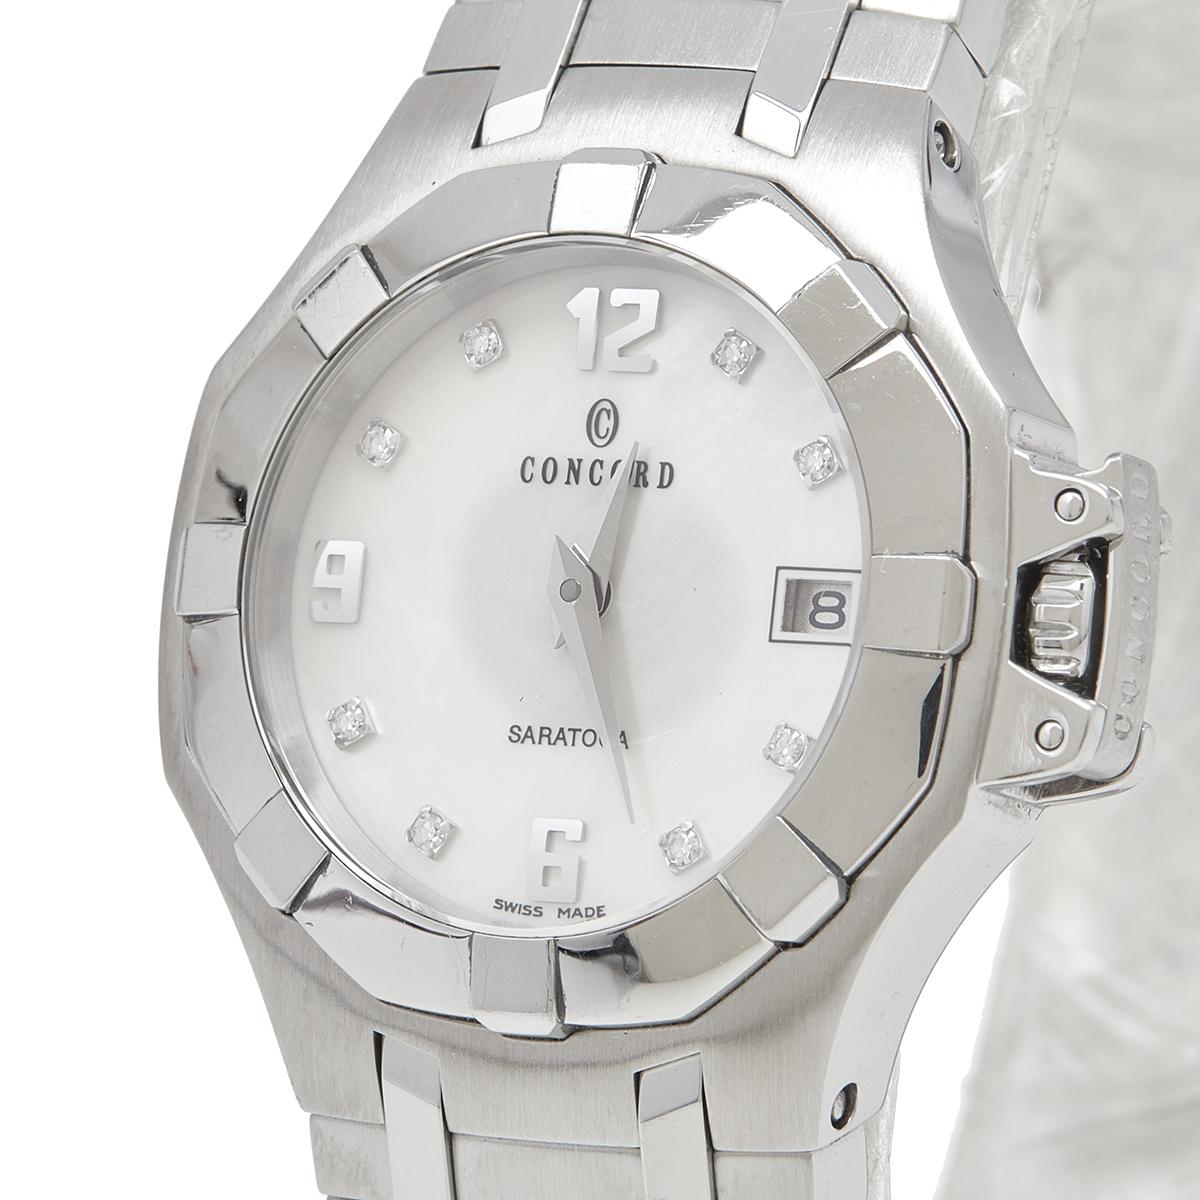 A perfect piece of accessory to pair with both your daytime casuals as well as smarter and chic looks, this Concord Saratoga wristwatch is a must-have for all with classic taste. An exemplar of the label's fine artistry, this watch features a